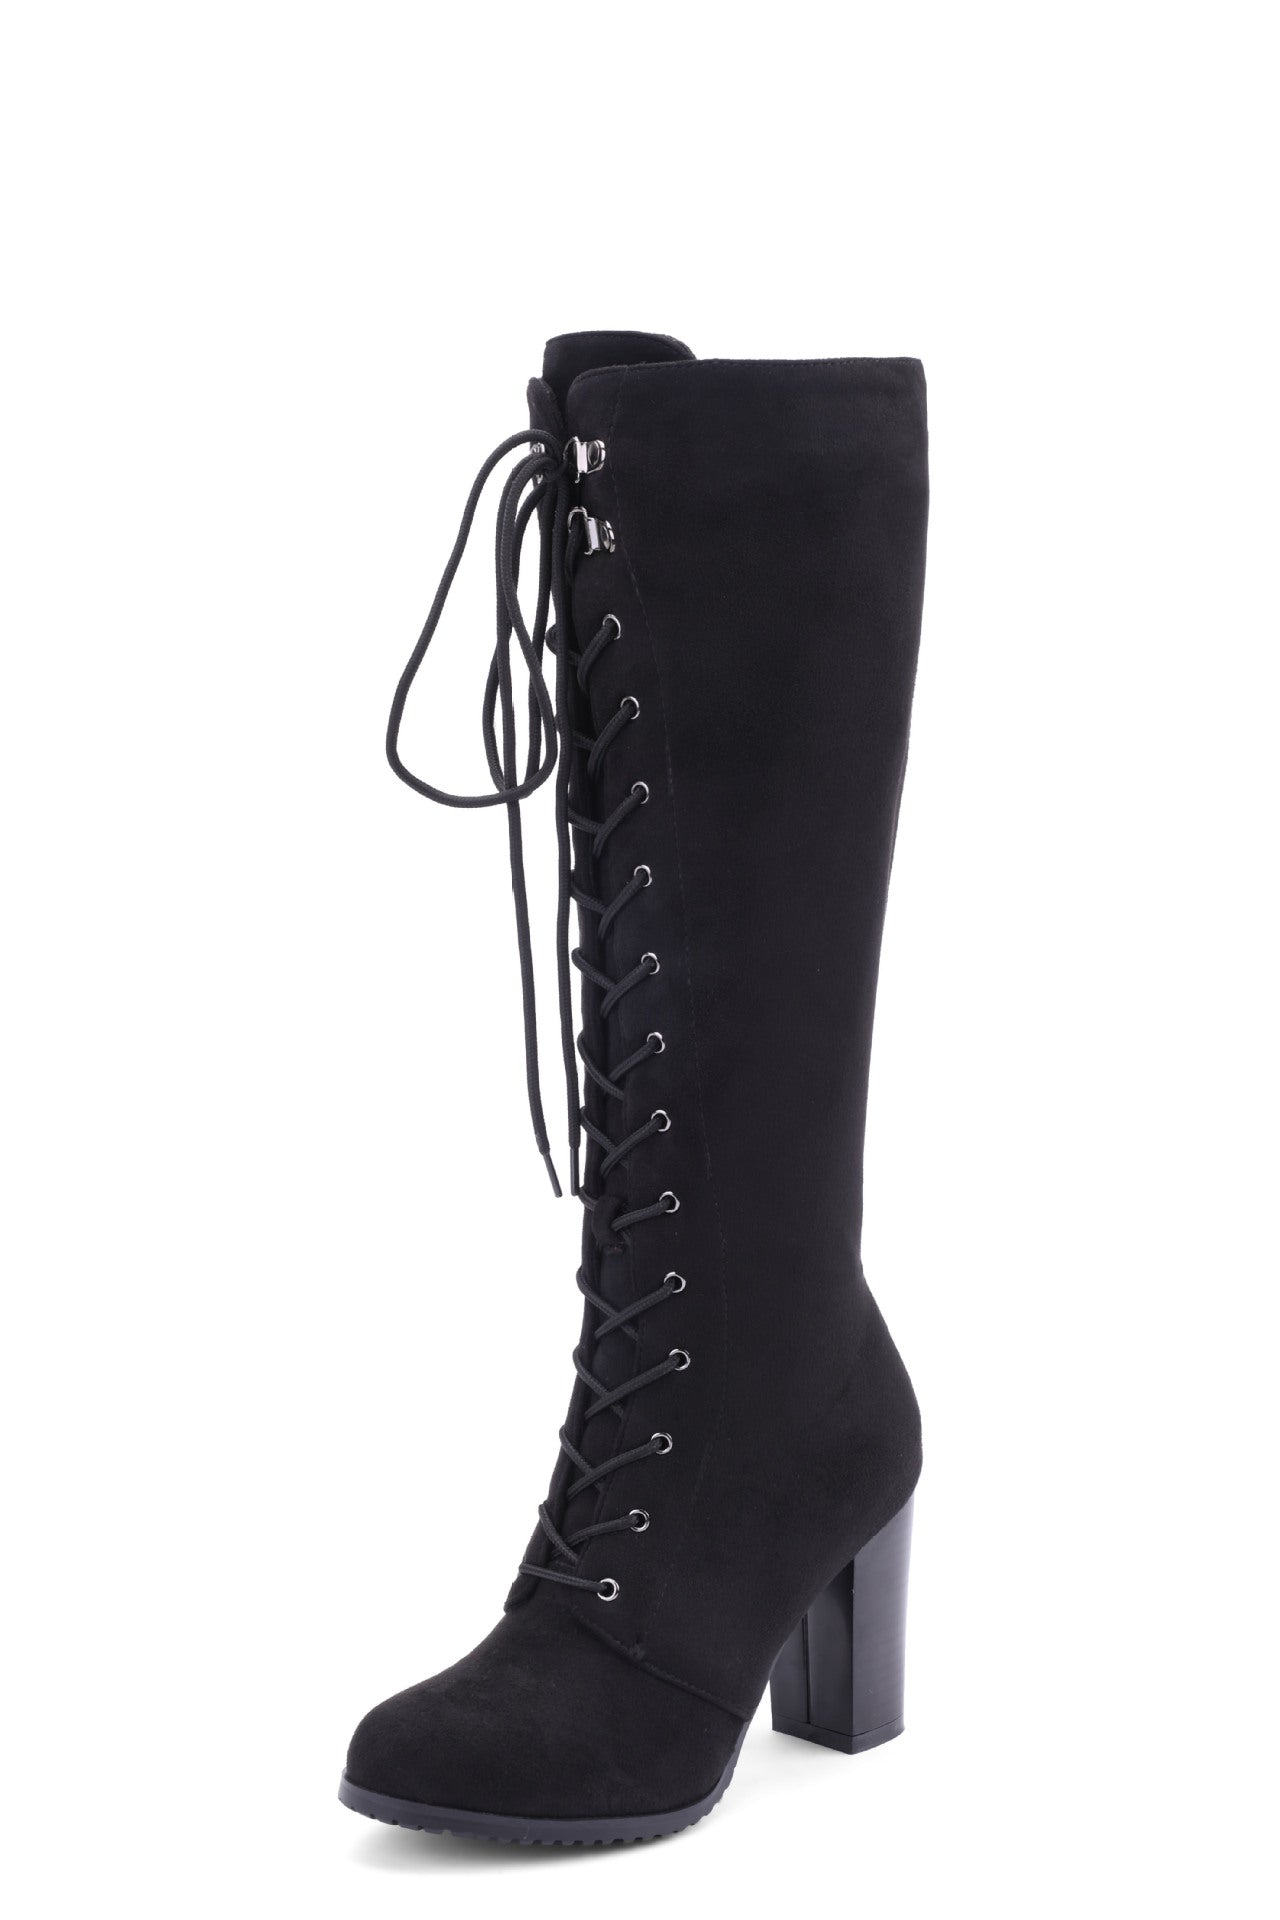 Women's High Boots Foreign Trade Thick High Heel